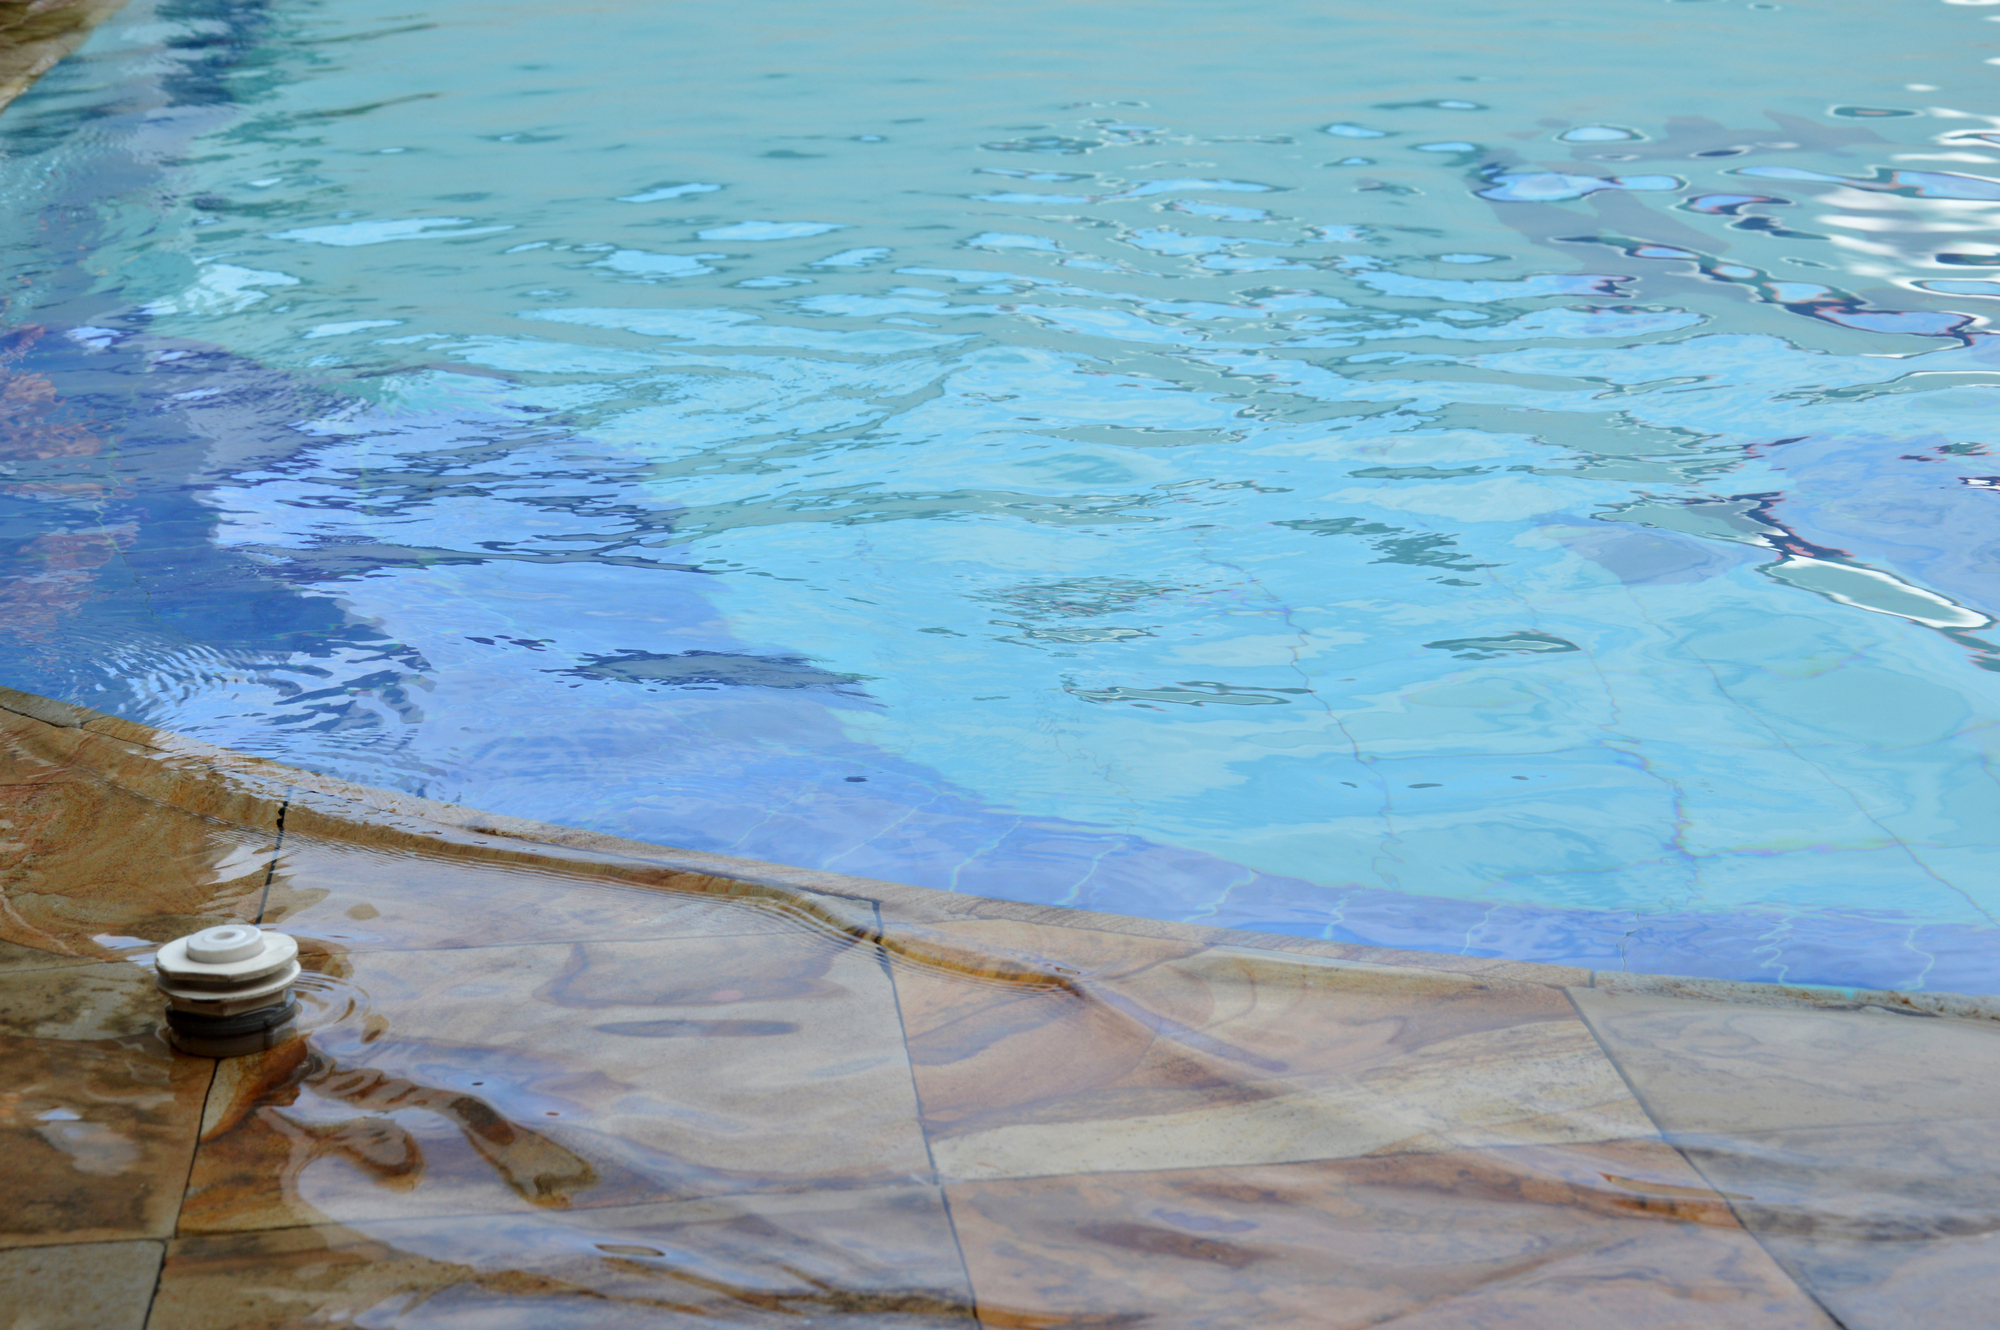 A close-up of a pool edge with a clean waterline and intact tiles, illustrating a well-maintained swimming pool